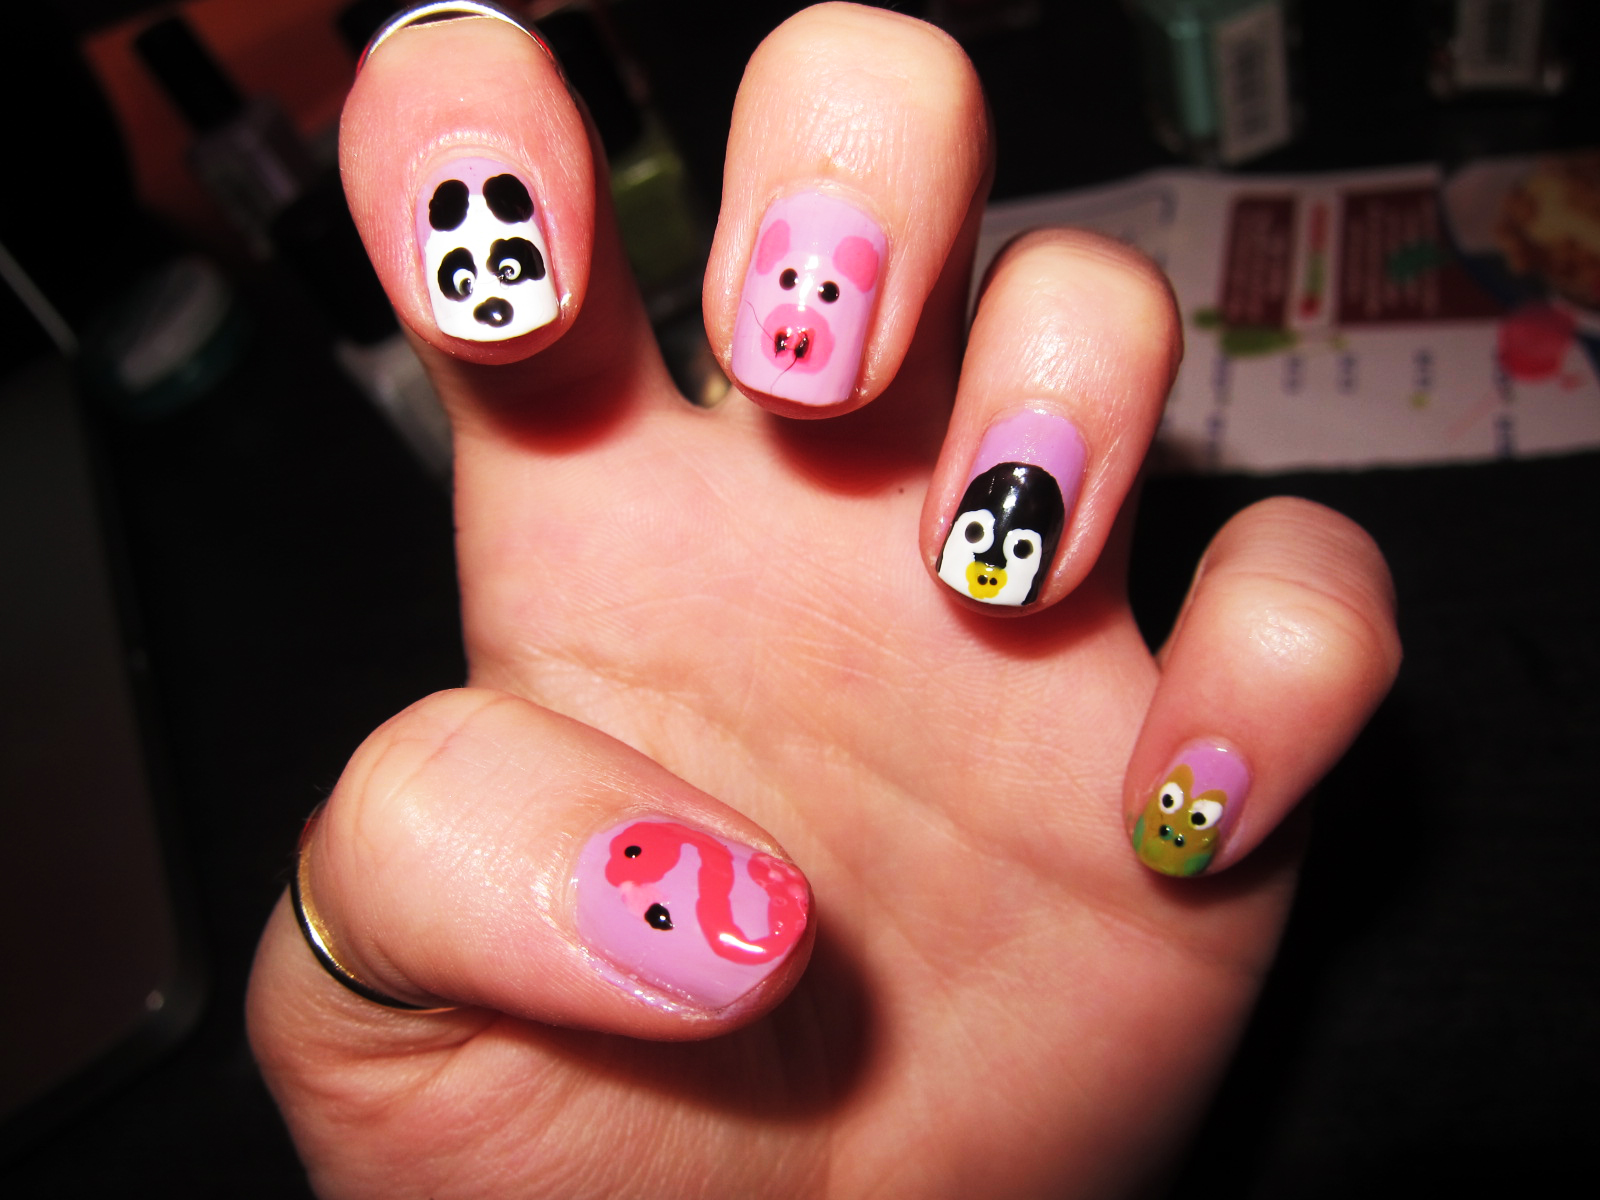 What is 'nail art design'? Can you share some good photos of it? - Quora